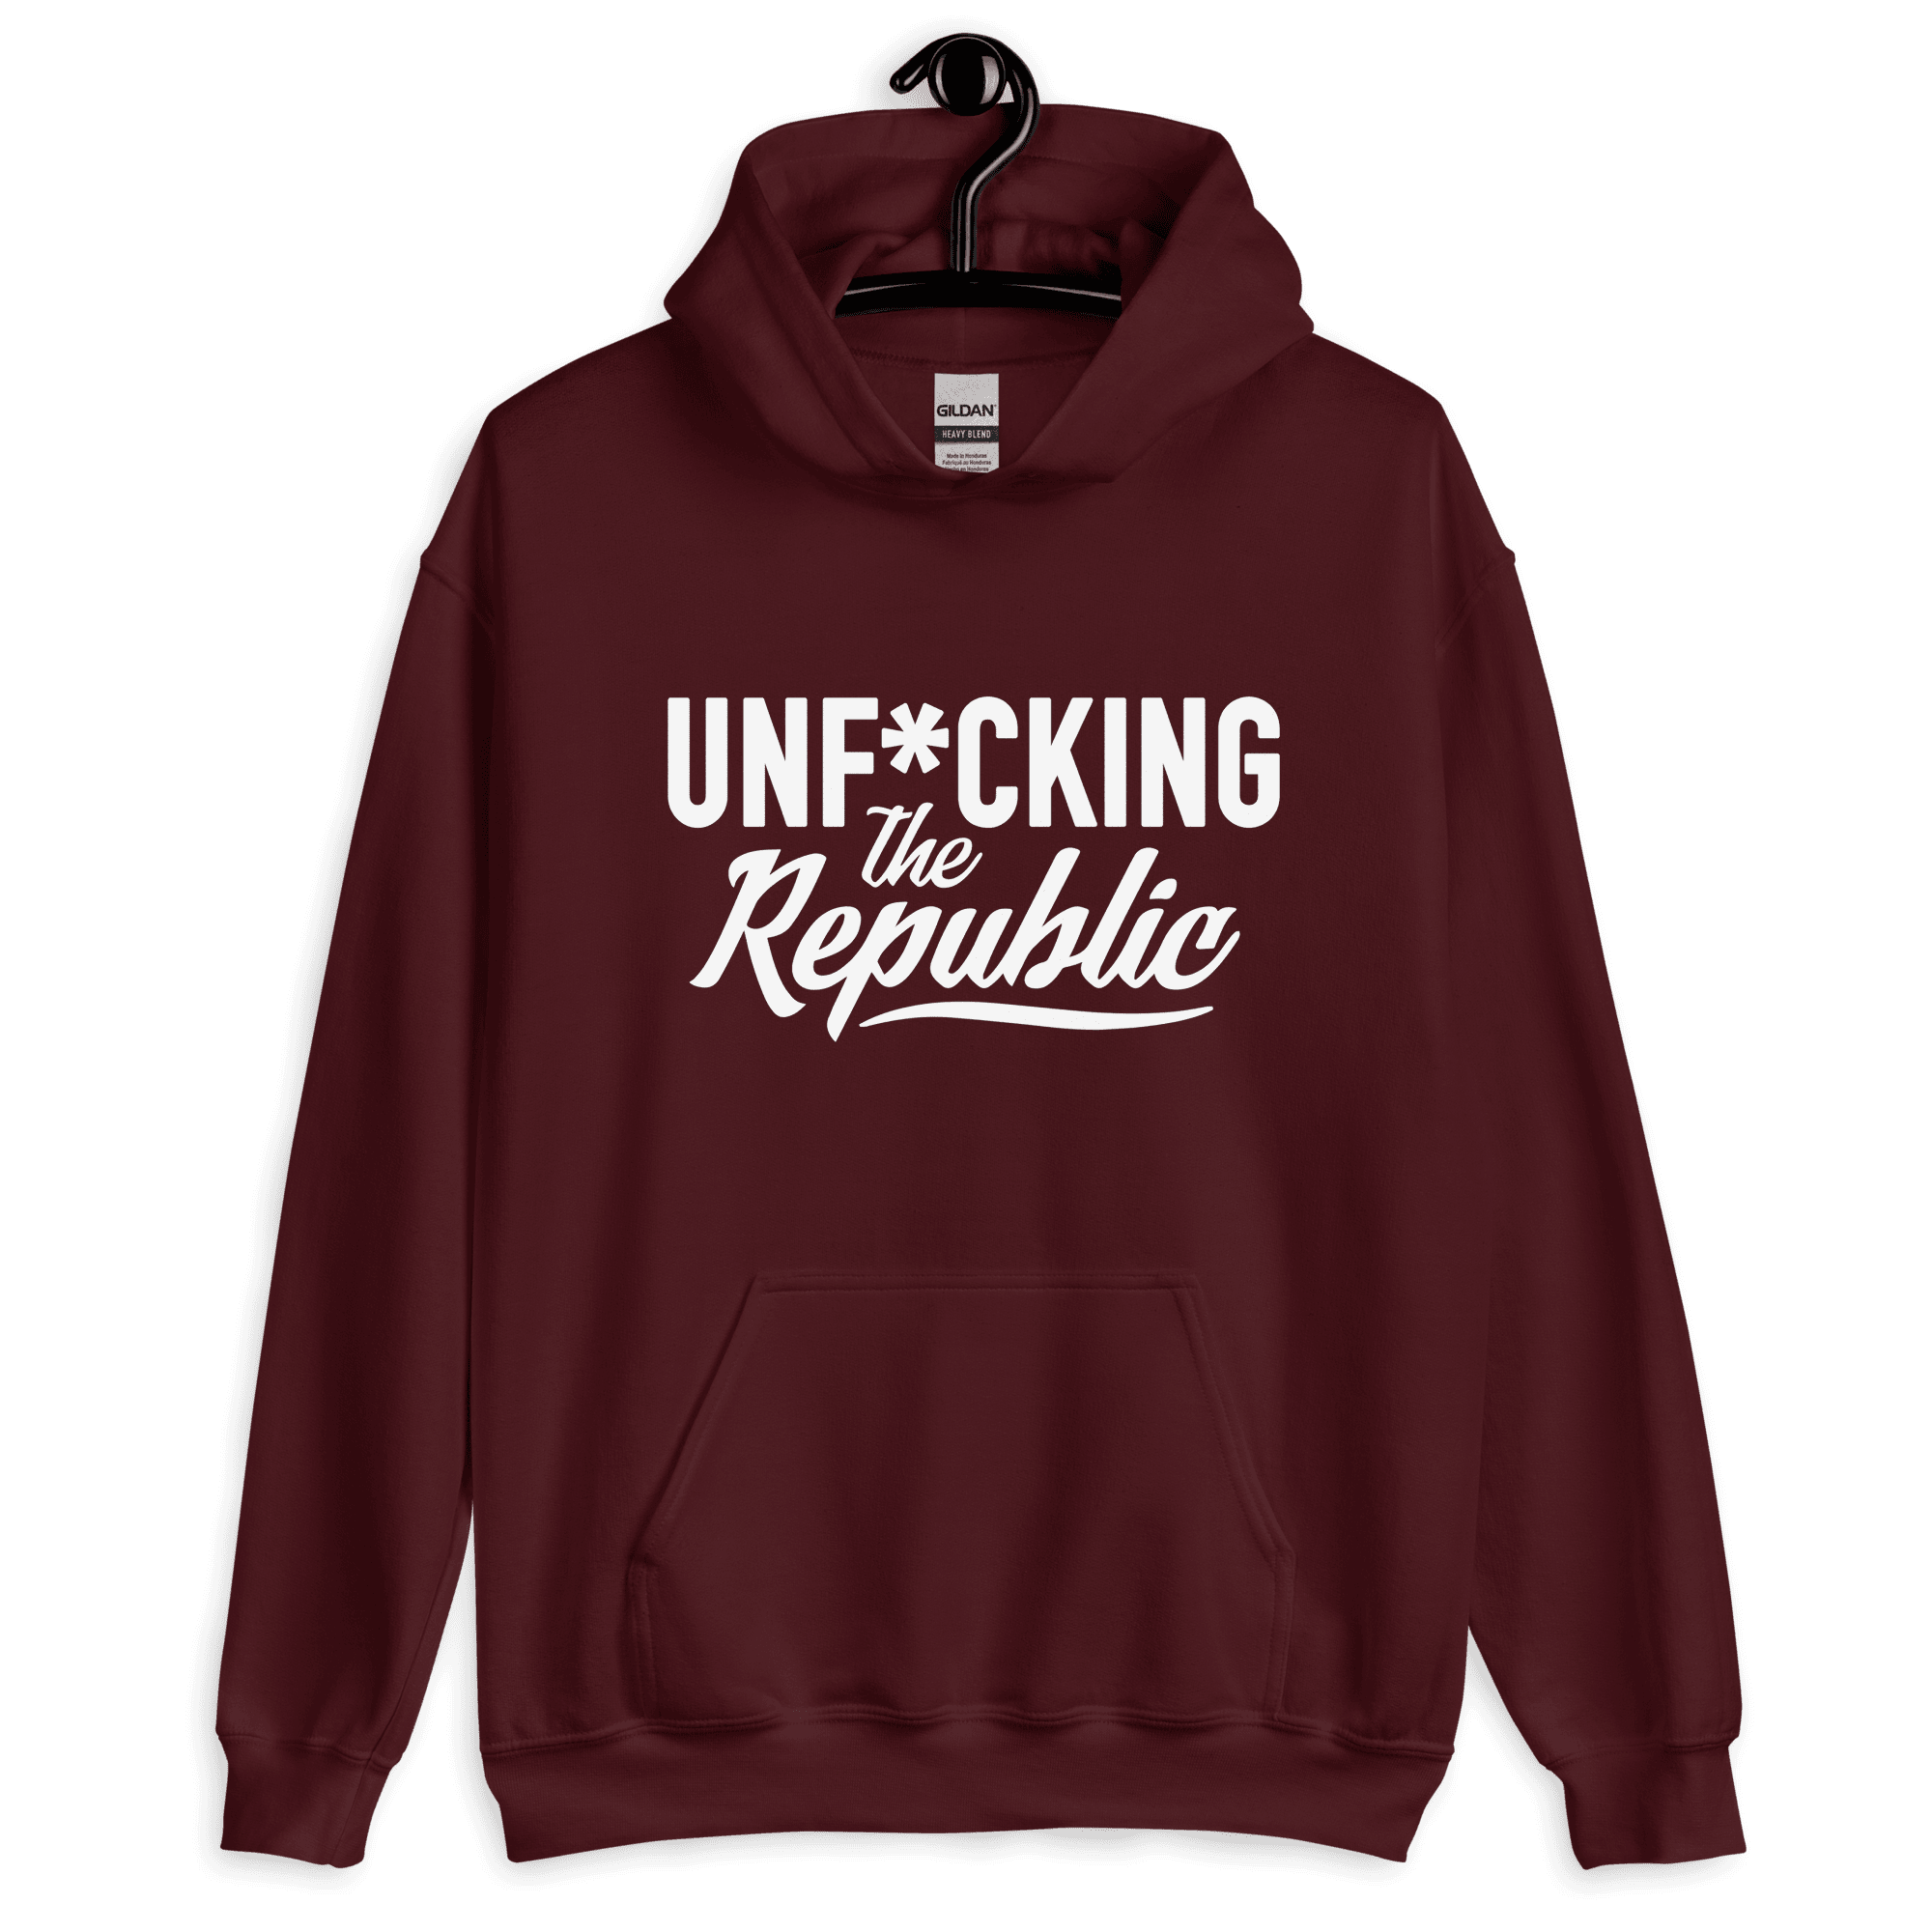 Maroon hoodie with white logo that say Unf*cking The Republic.